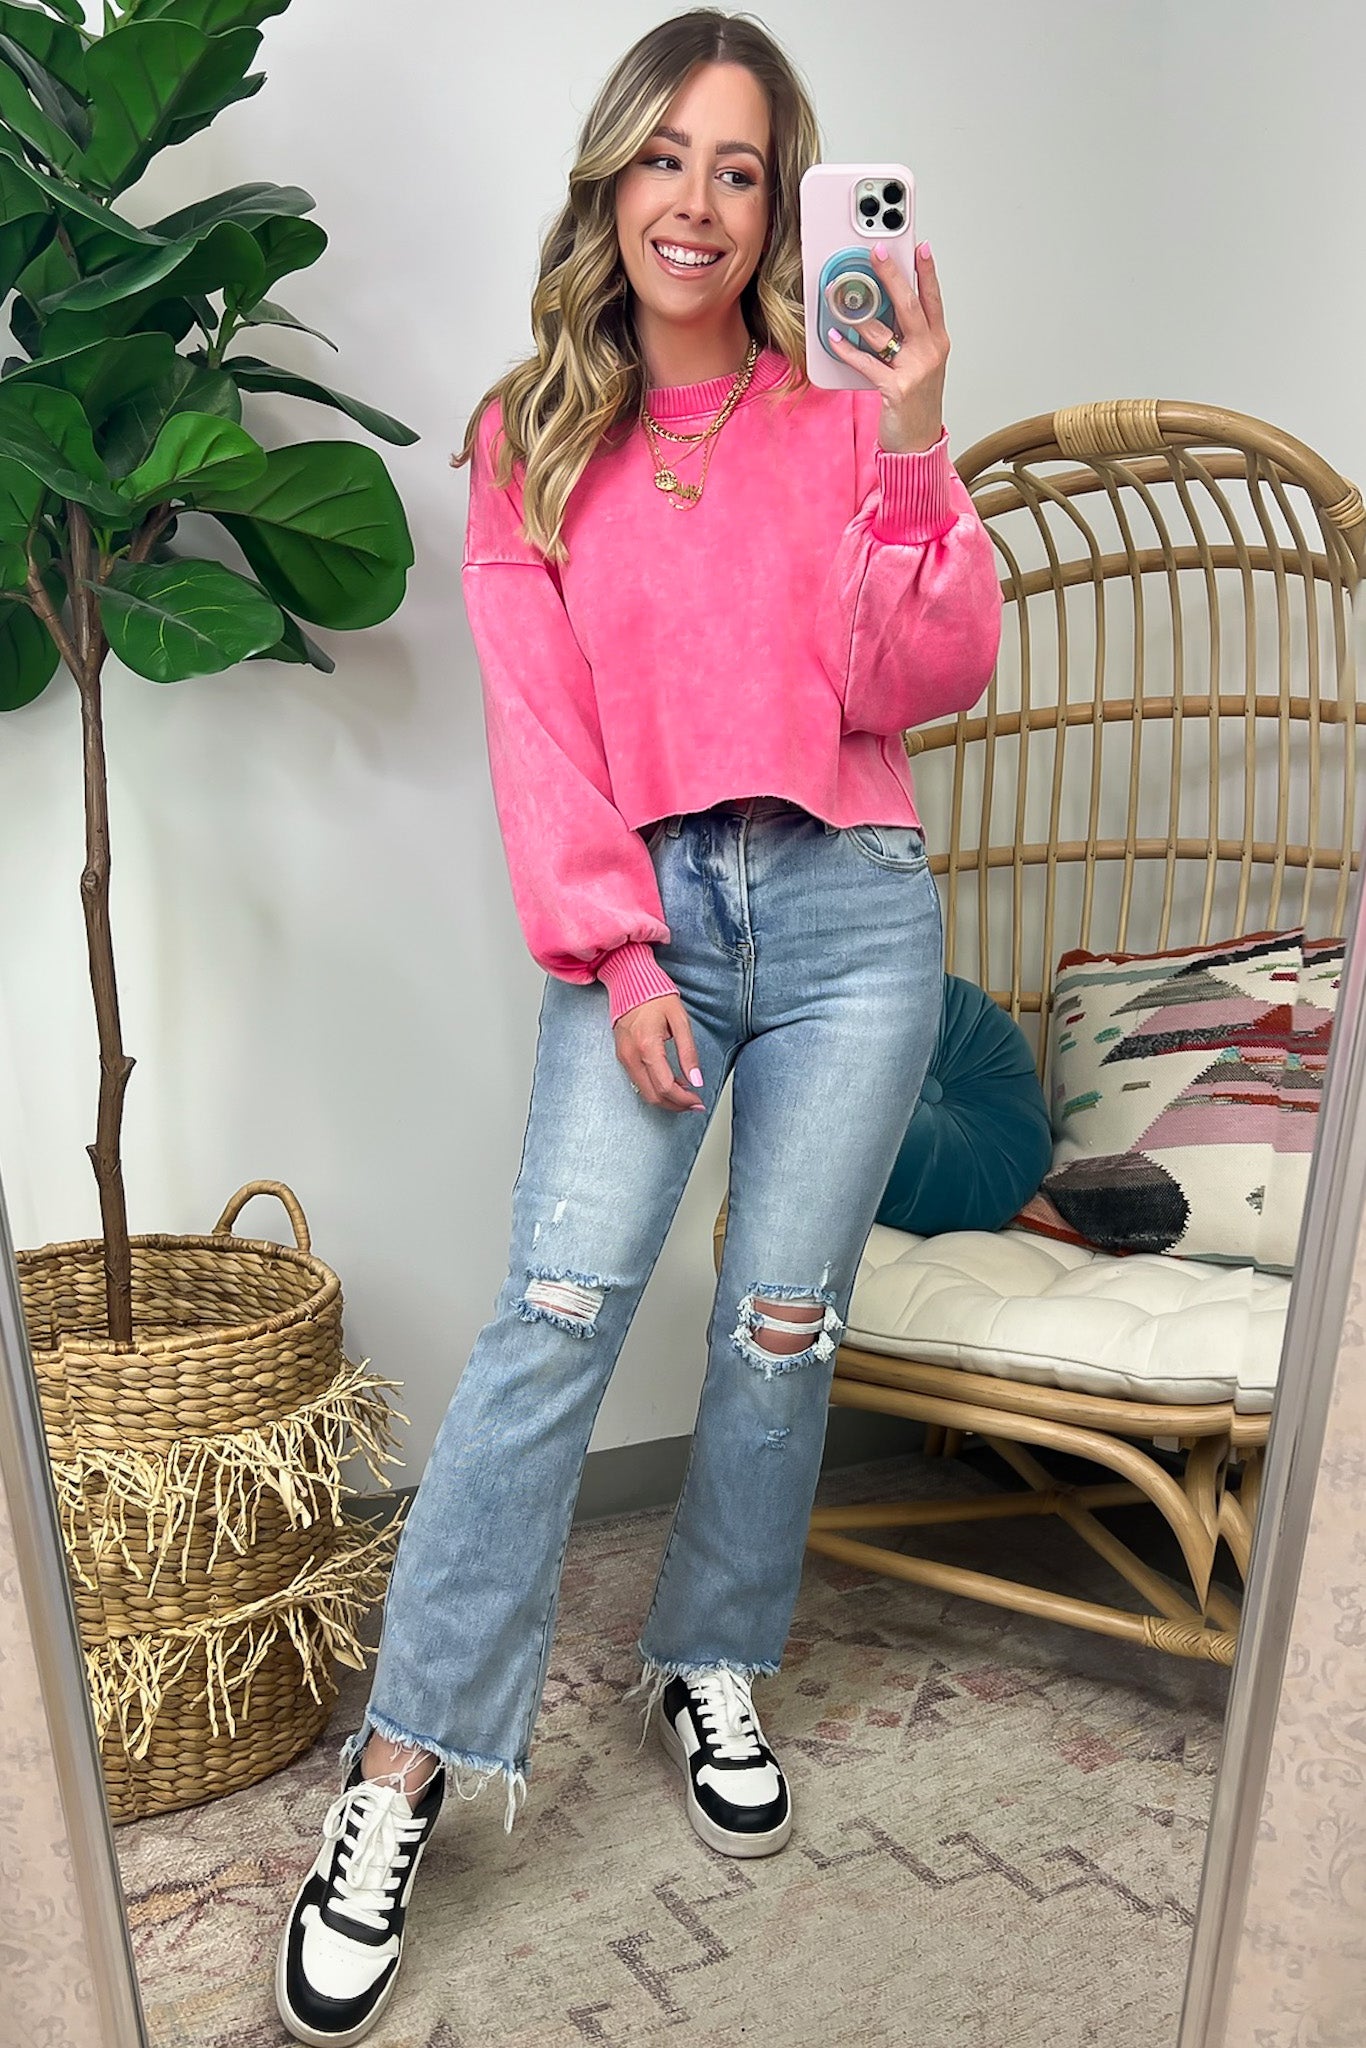  Kerie Acid Wash Fleece Cropped Pullover - Madison and Mallory